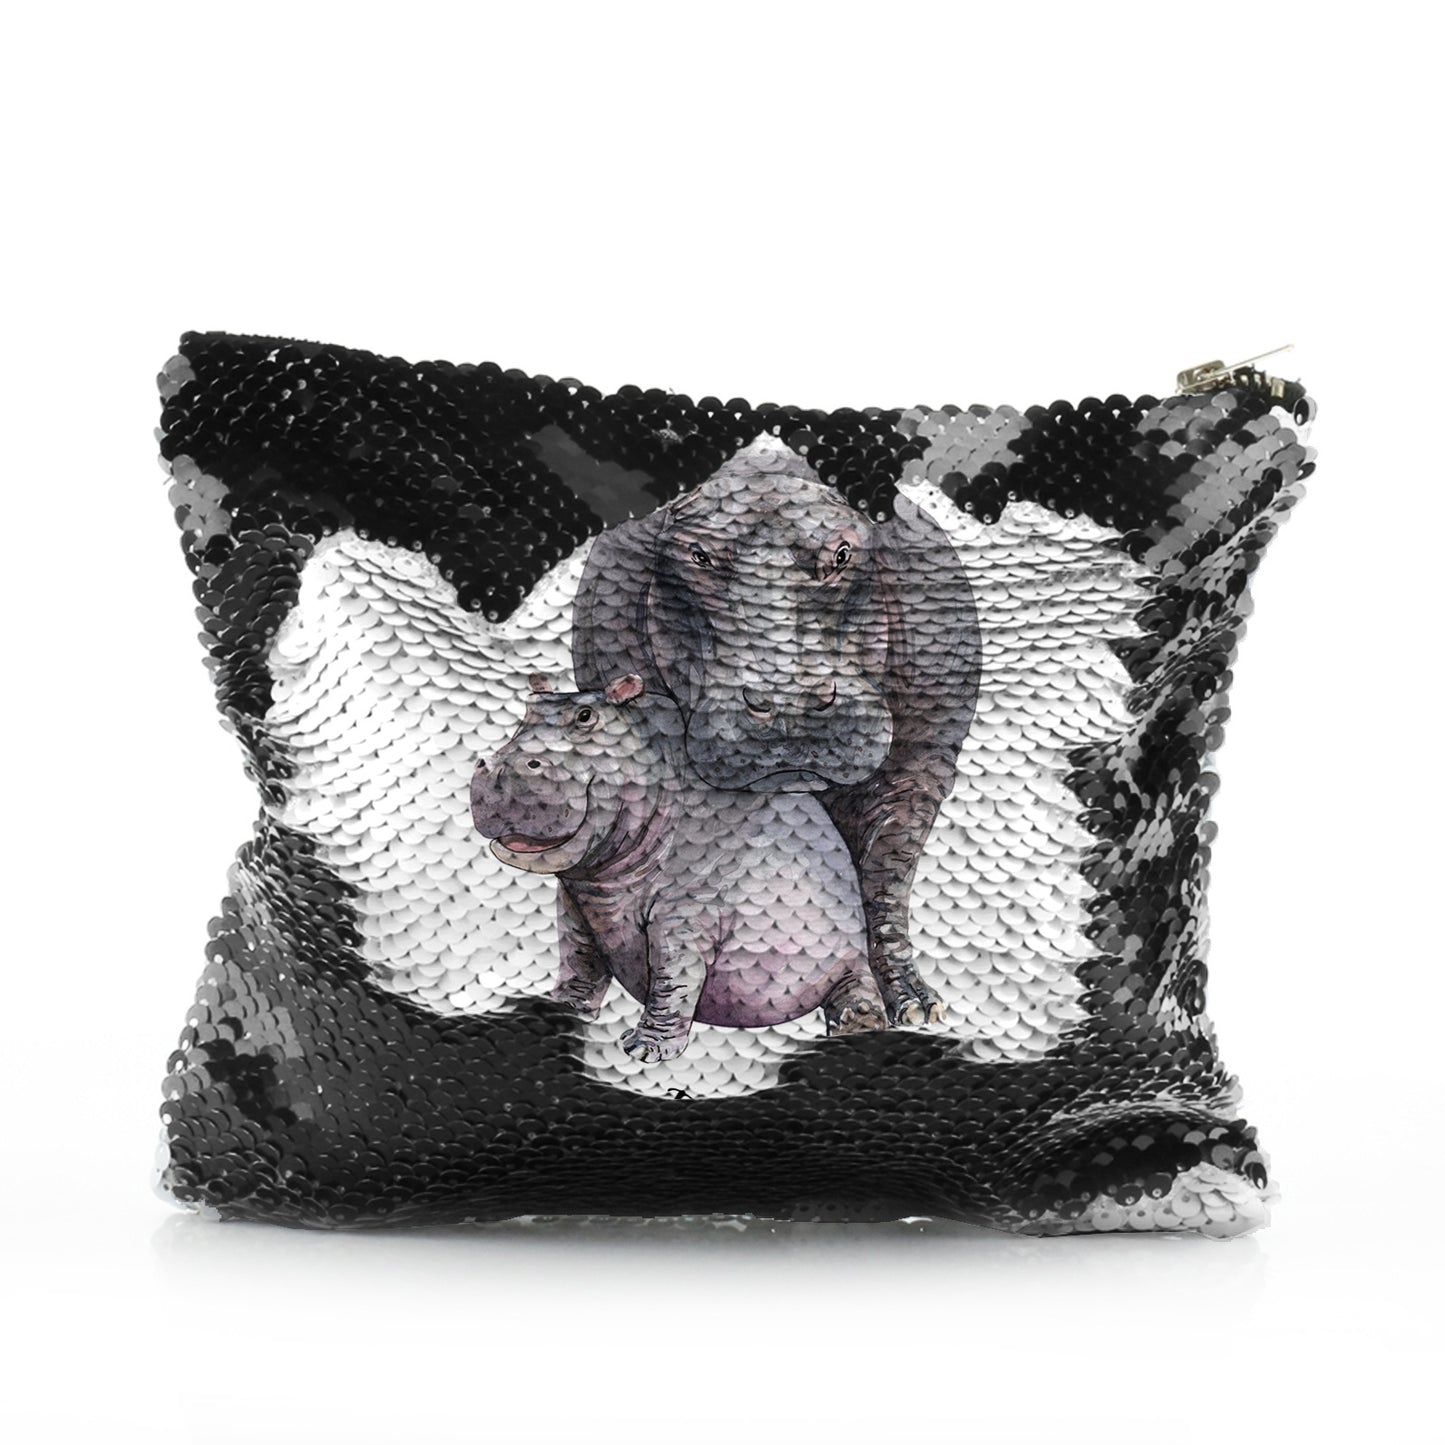 Personalised Sequin Zip Bag with Welcoming Text and Embracing Mum and Baby Hippos